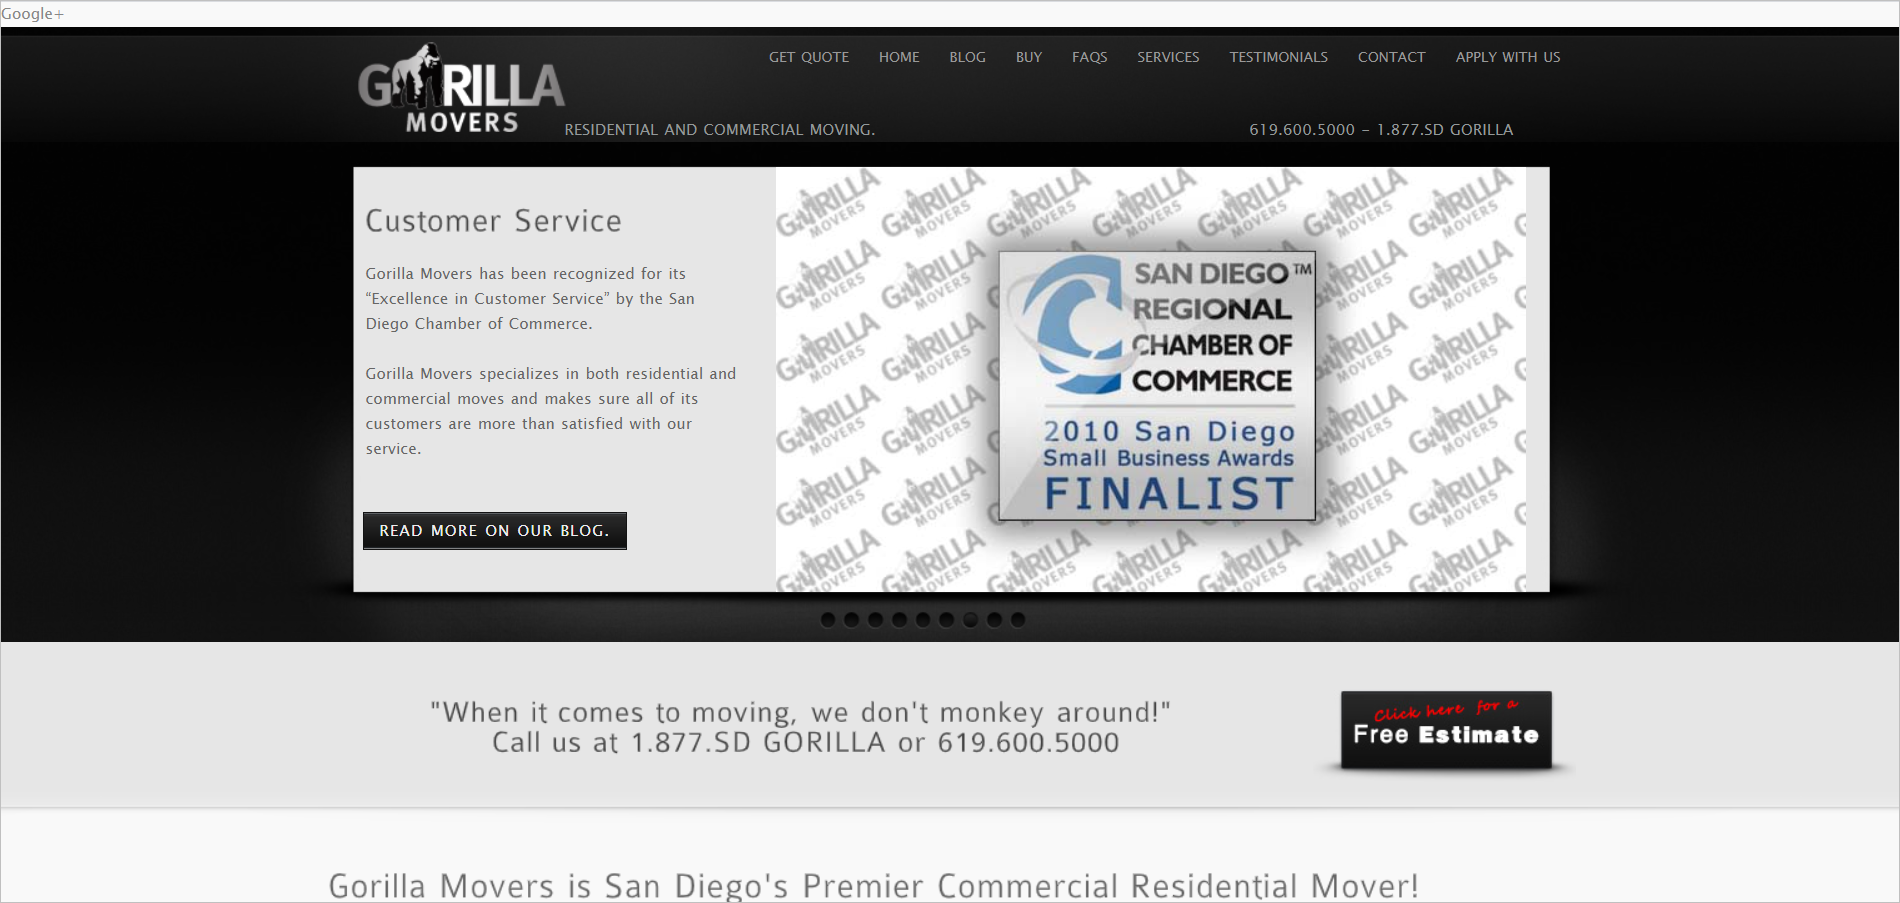 example of poor navigation - above-the-fold real estate of gorillamovers.com's homepage on …